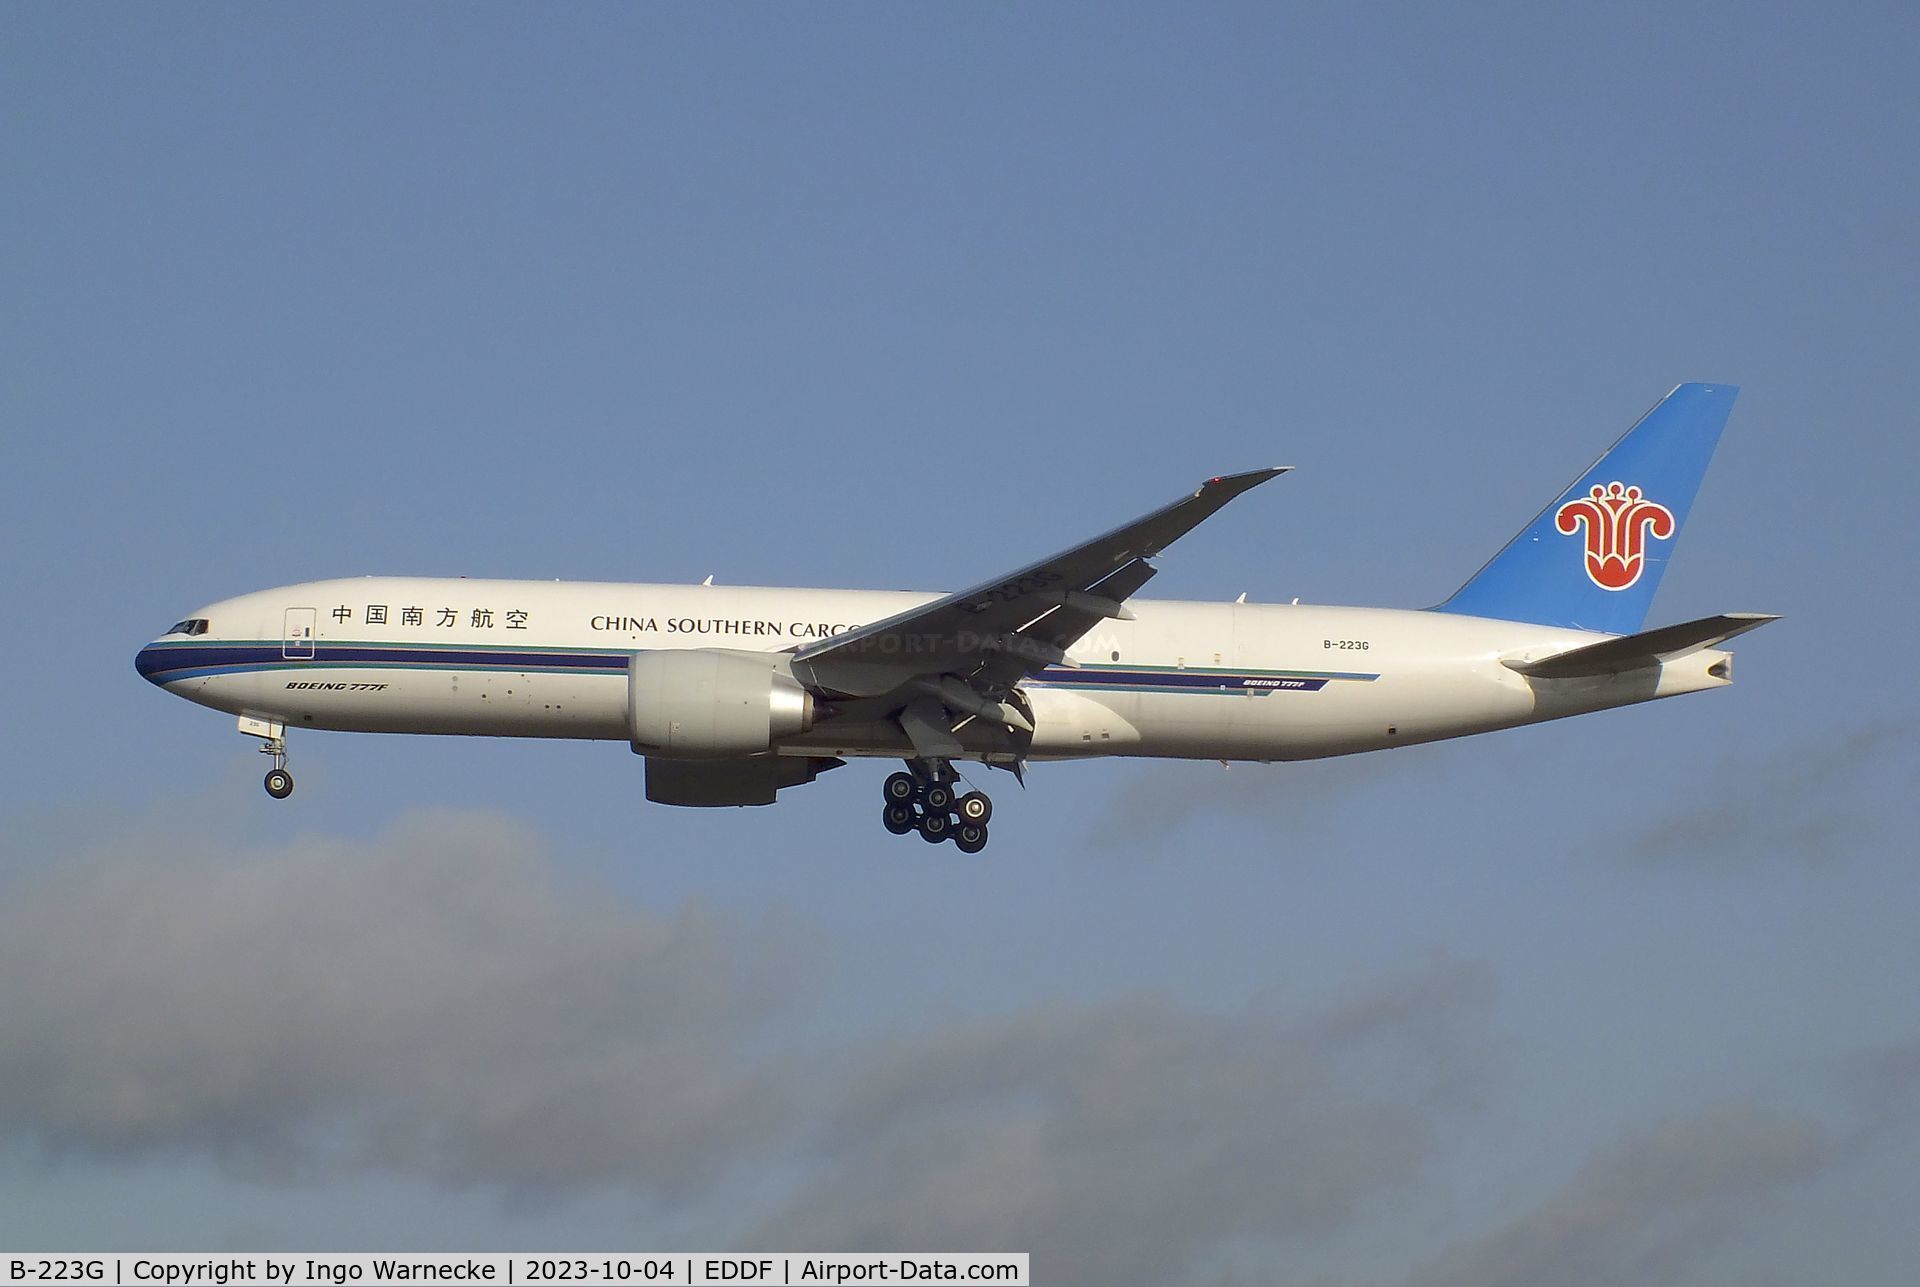 B-223G, 2023 Boeing 777-F C/N 67821, Boeing 777F of China Southern Cargo on final approach to Frankfurt-Main airport